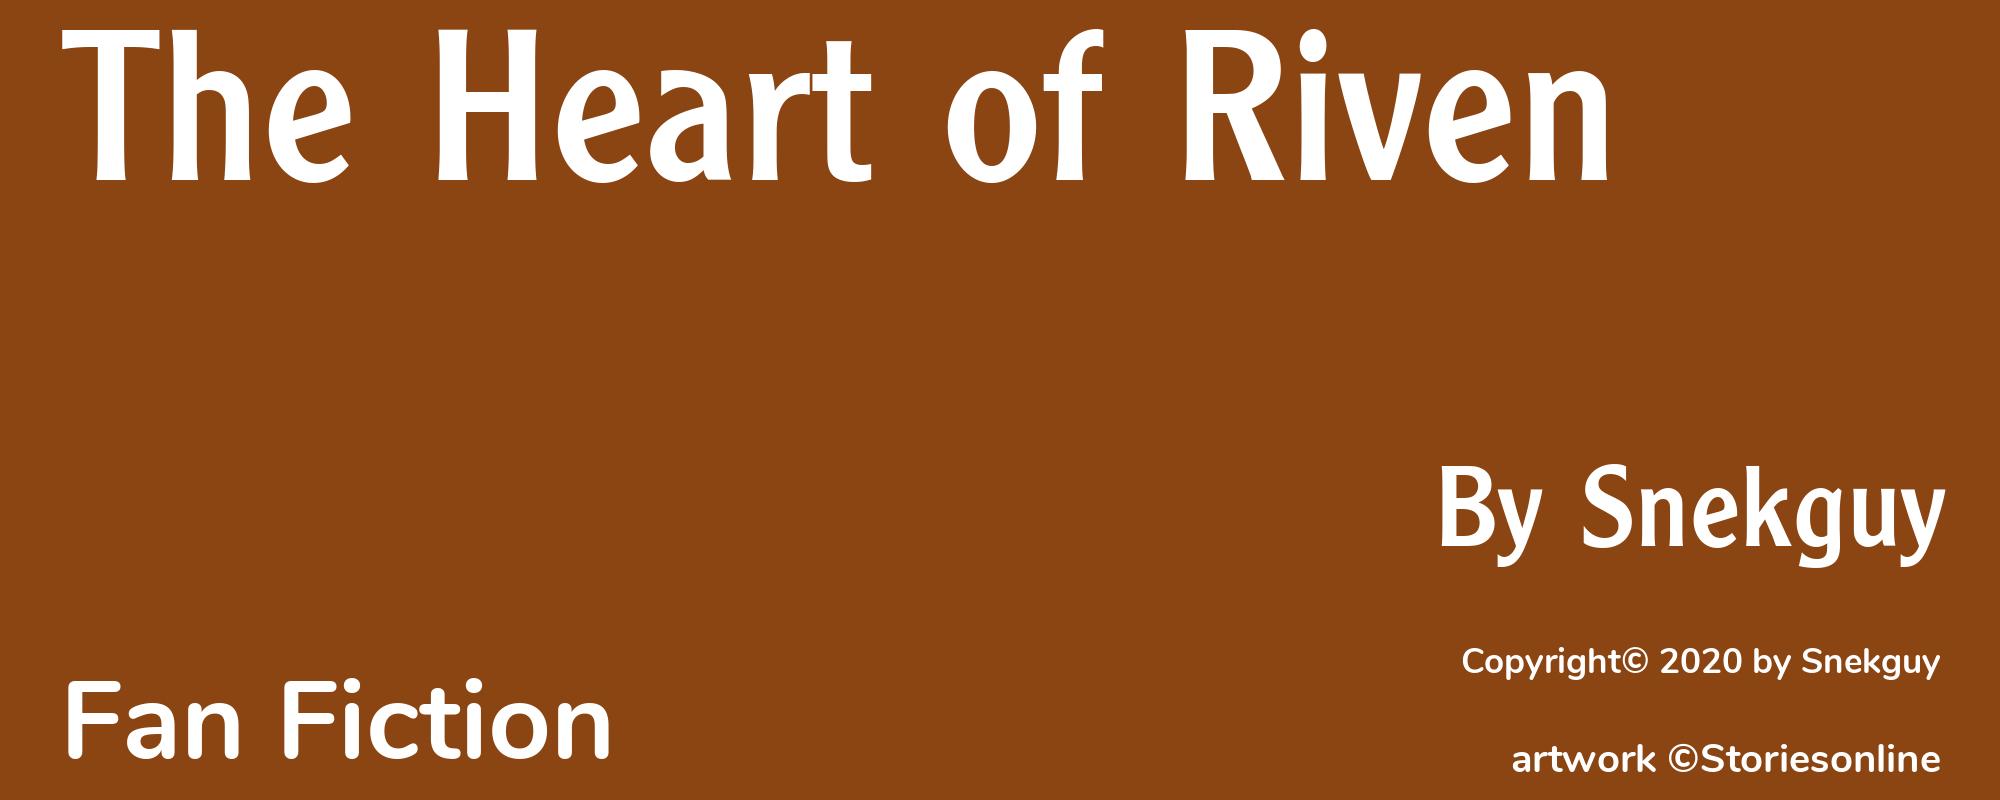 The Heart of Riven - Cover